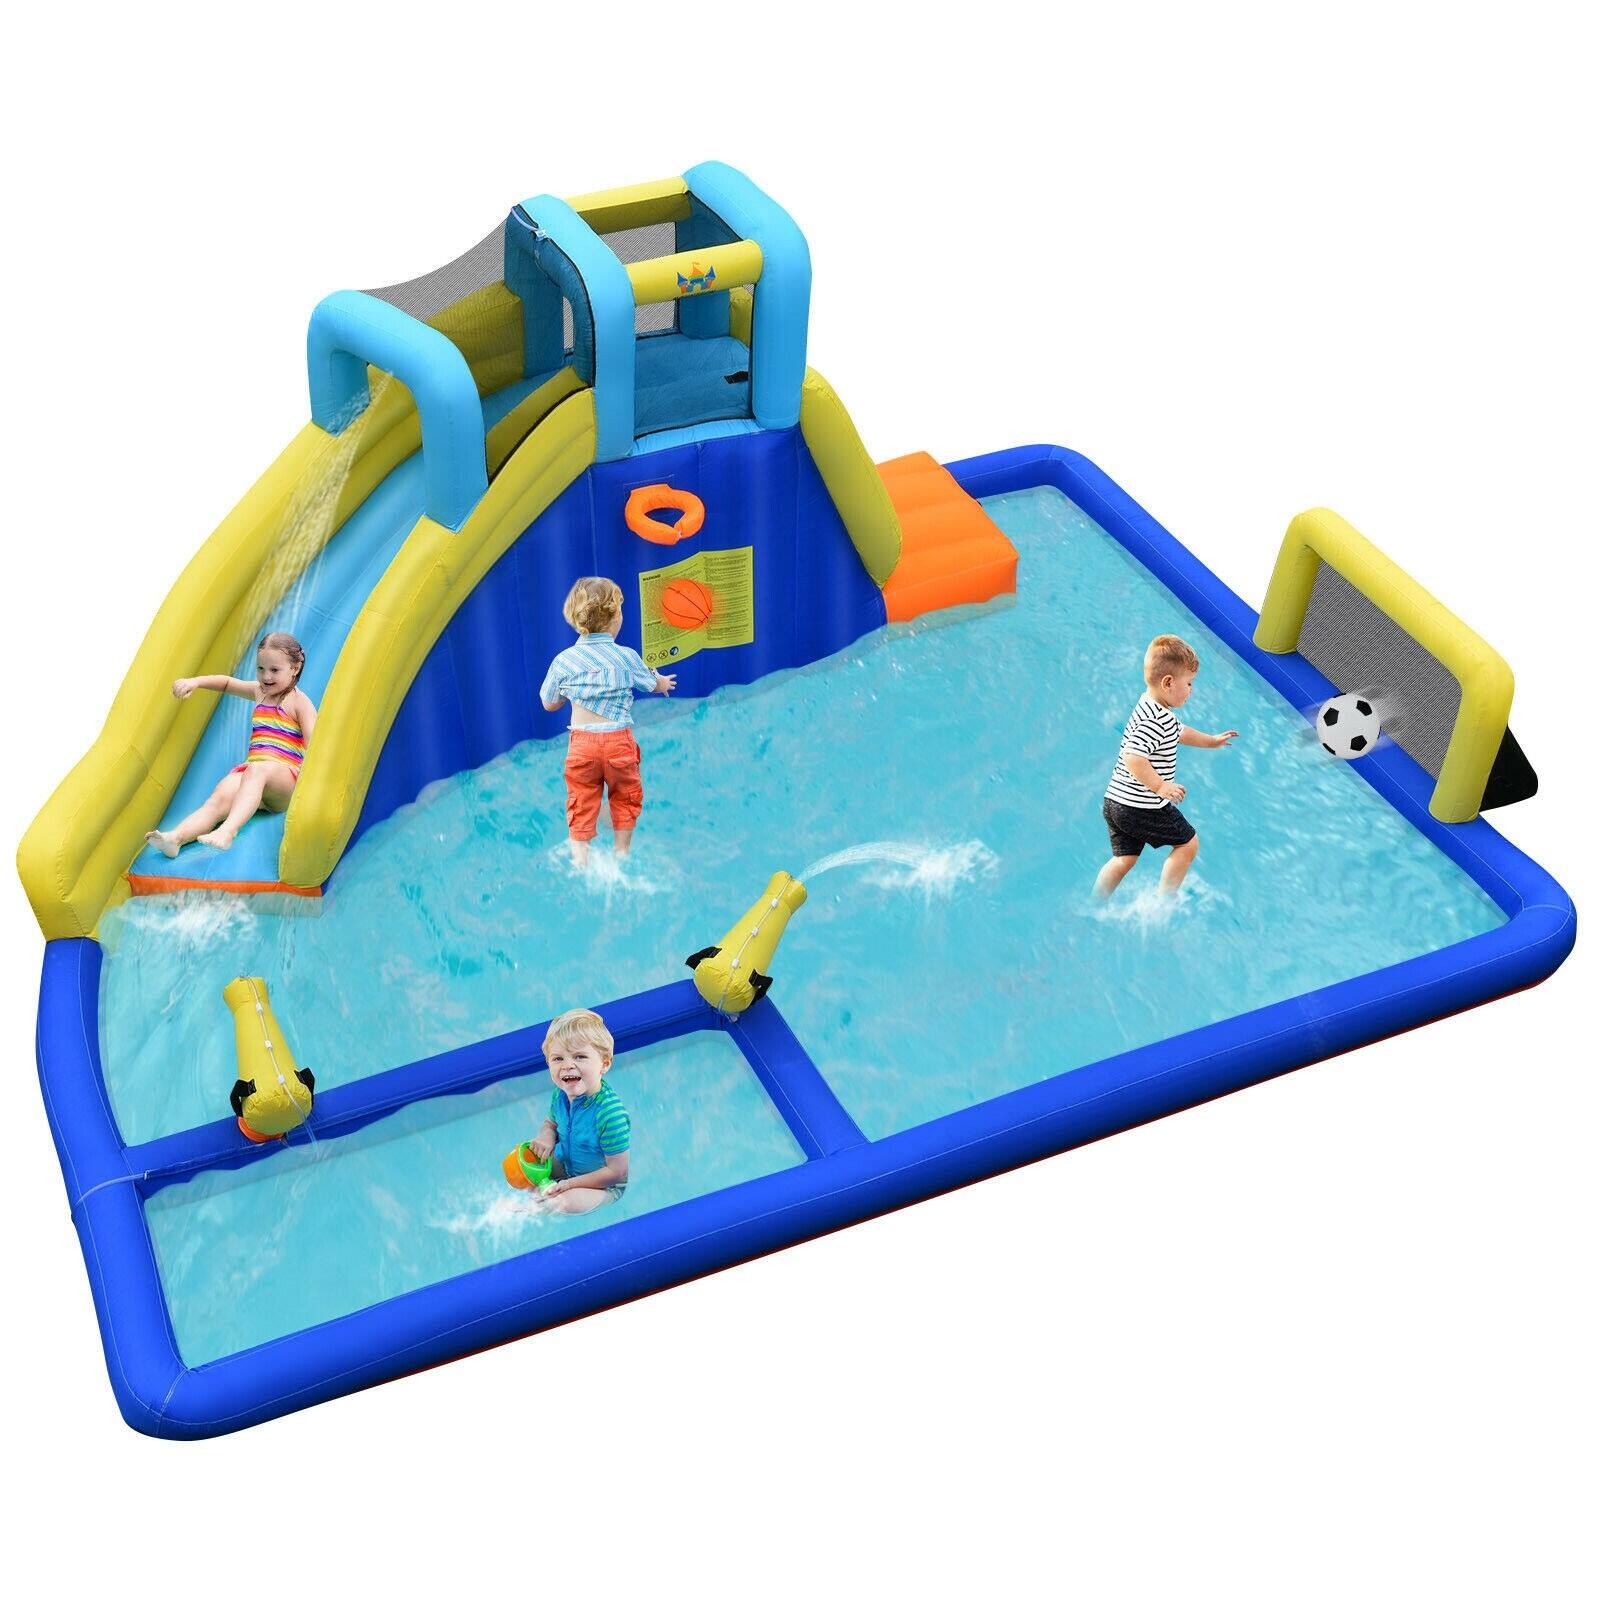 Costway Inflatable Water Slide Jumping House Splash Pool $269.95 with Free Shipping